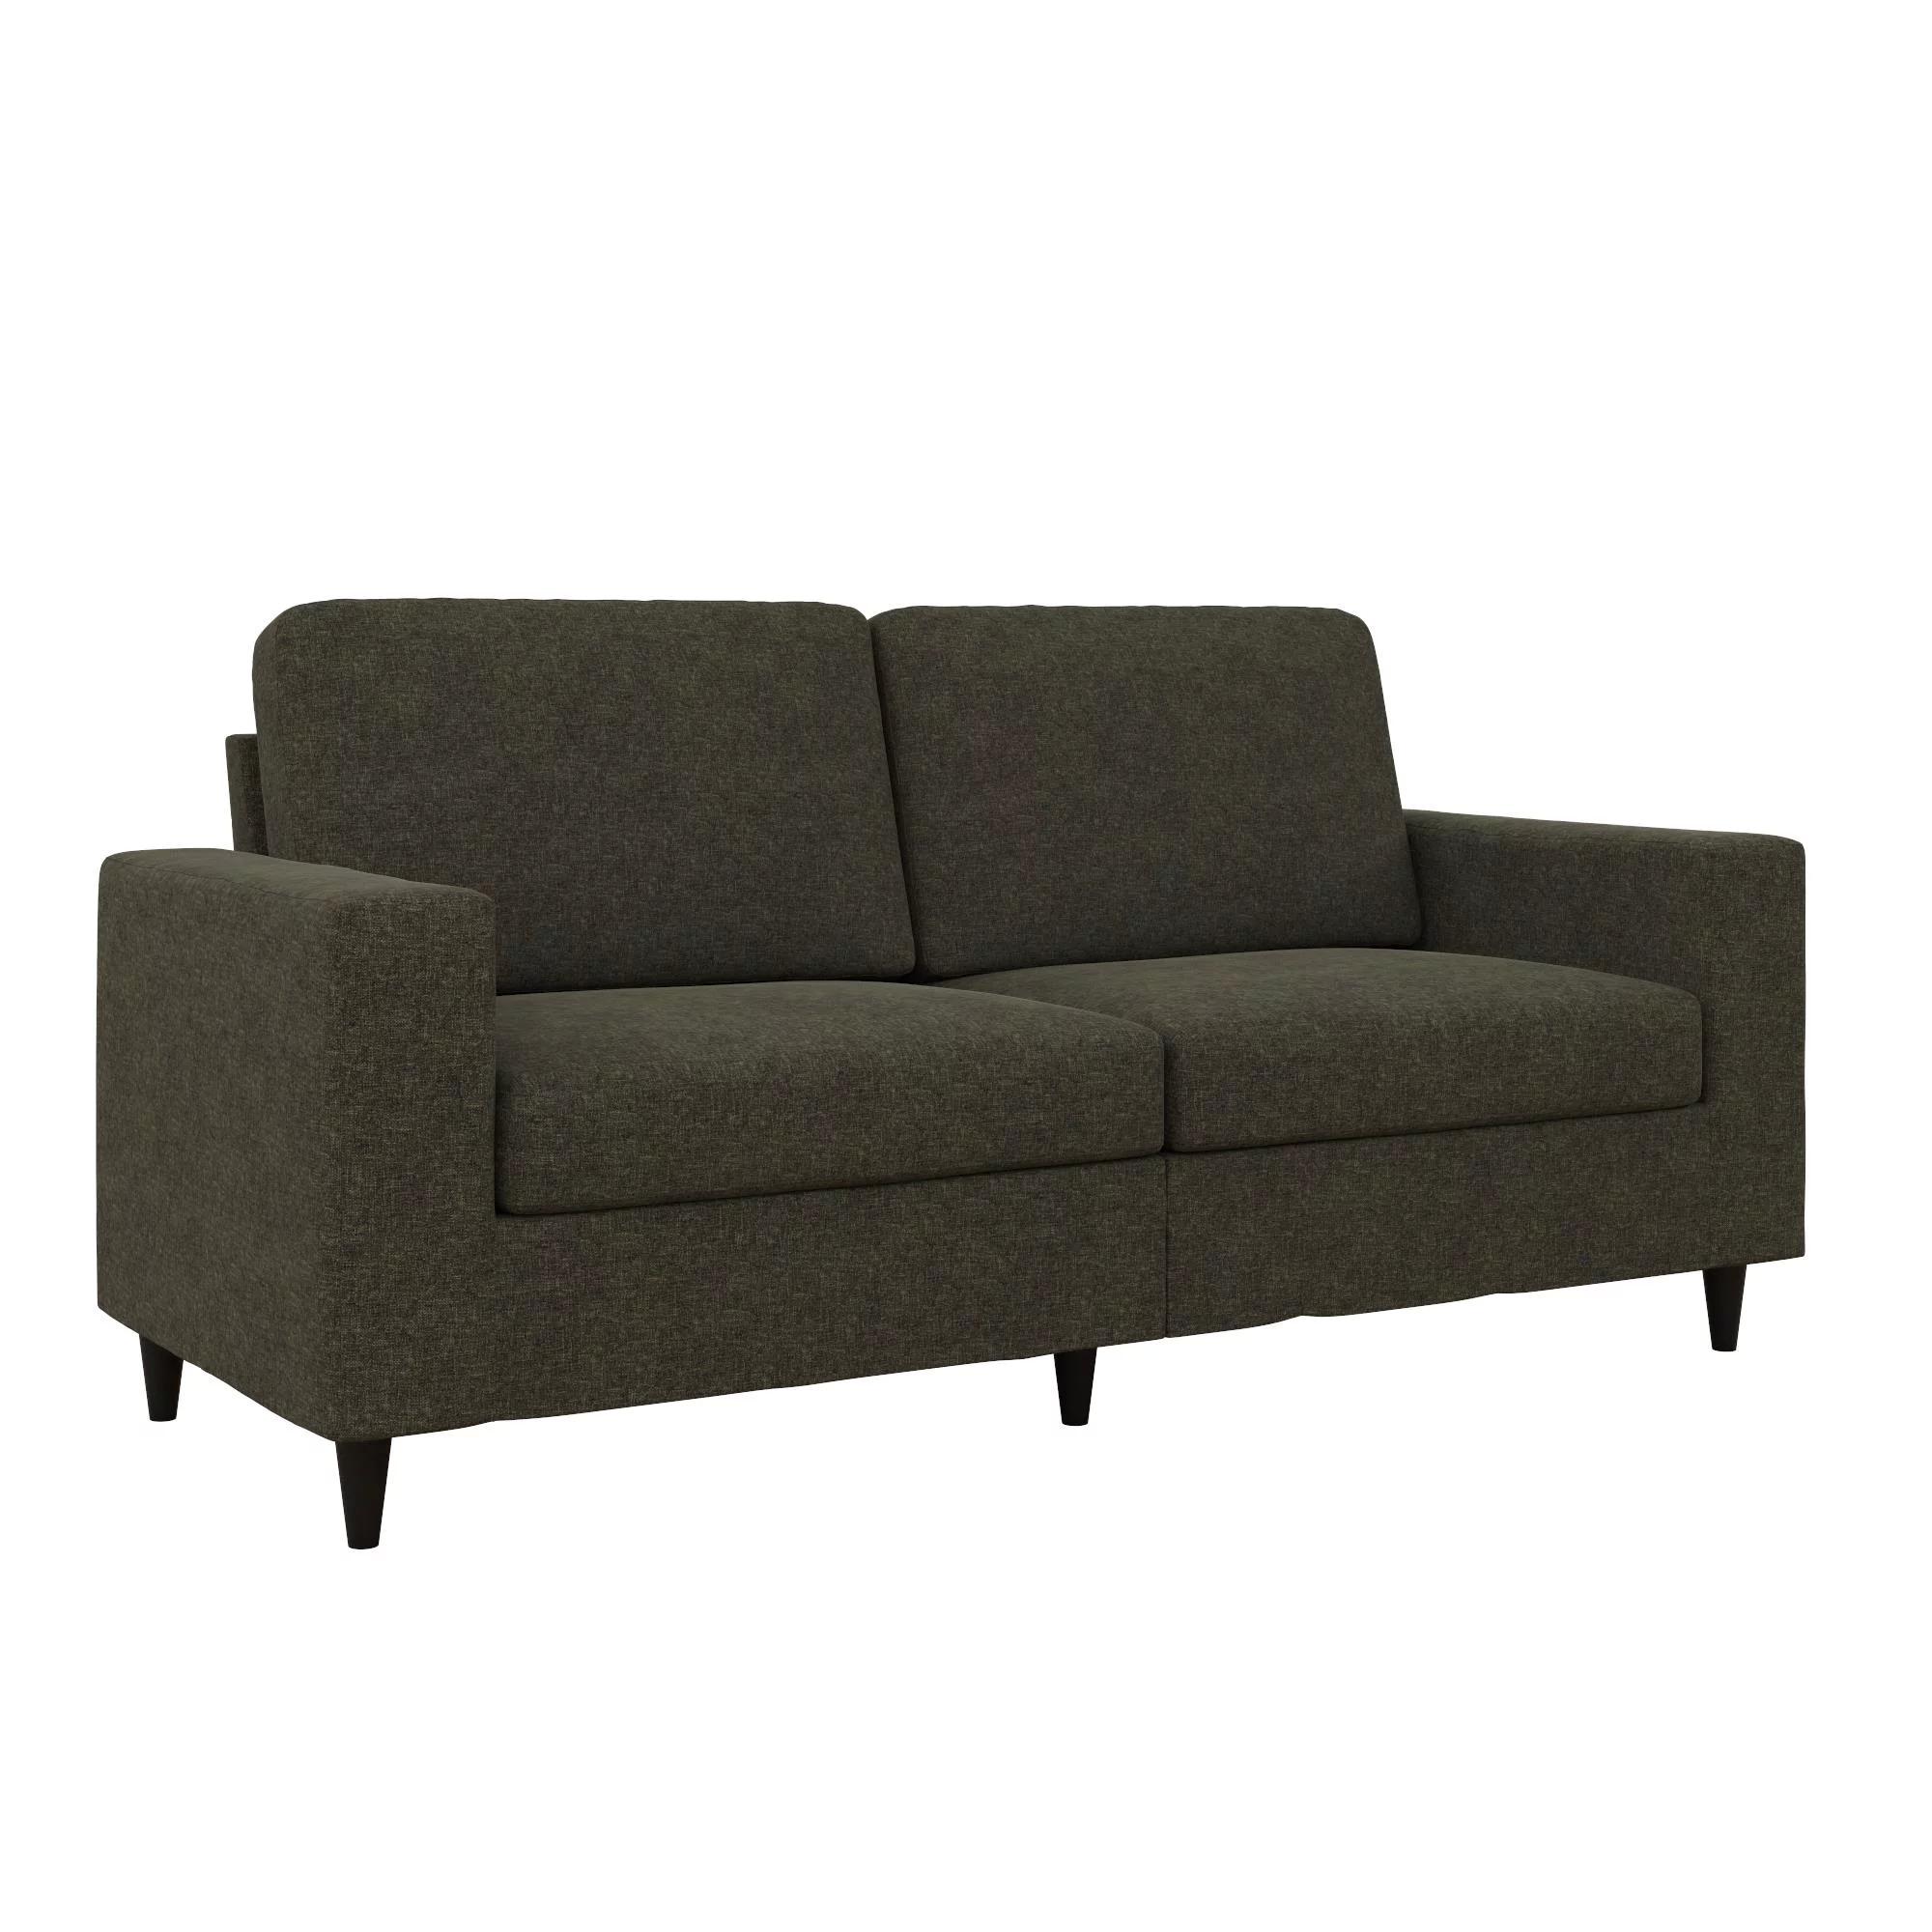 DHP Cooper 3-Seat Upholstered 62in Sofa for $235 Shipped